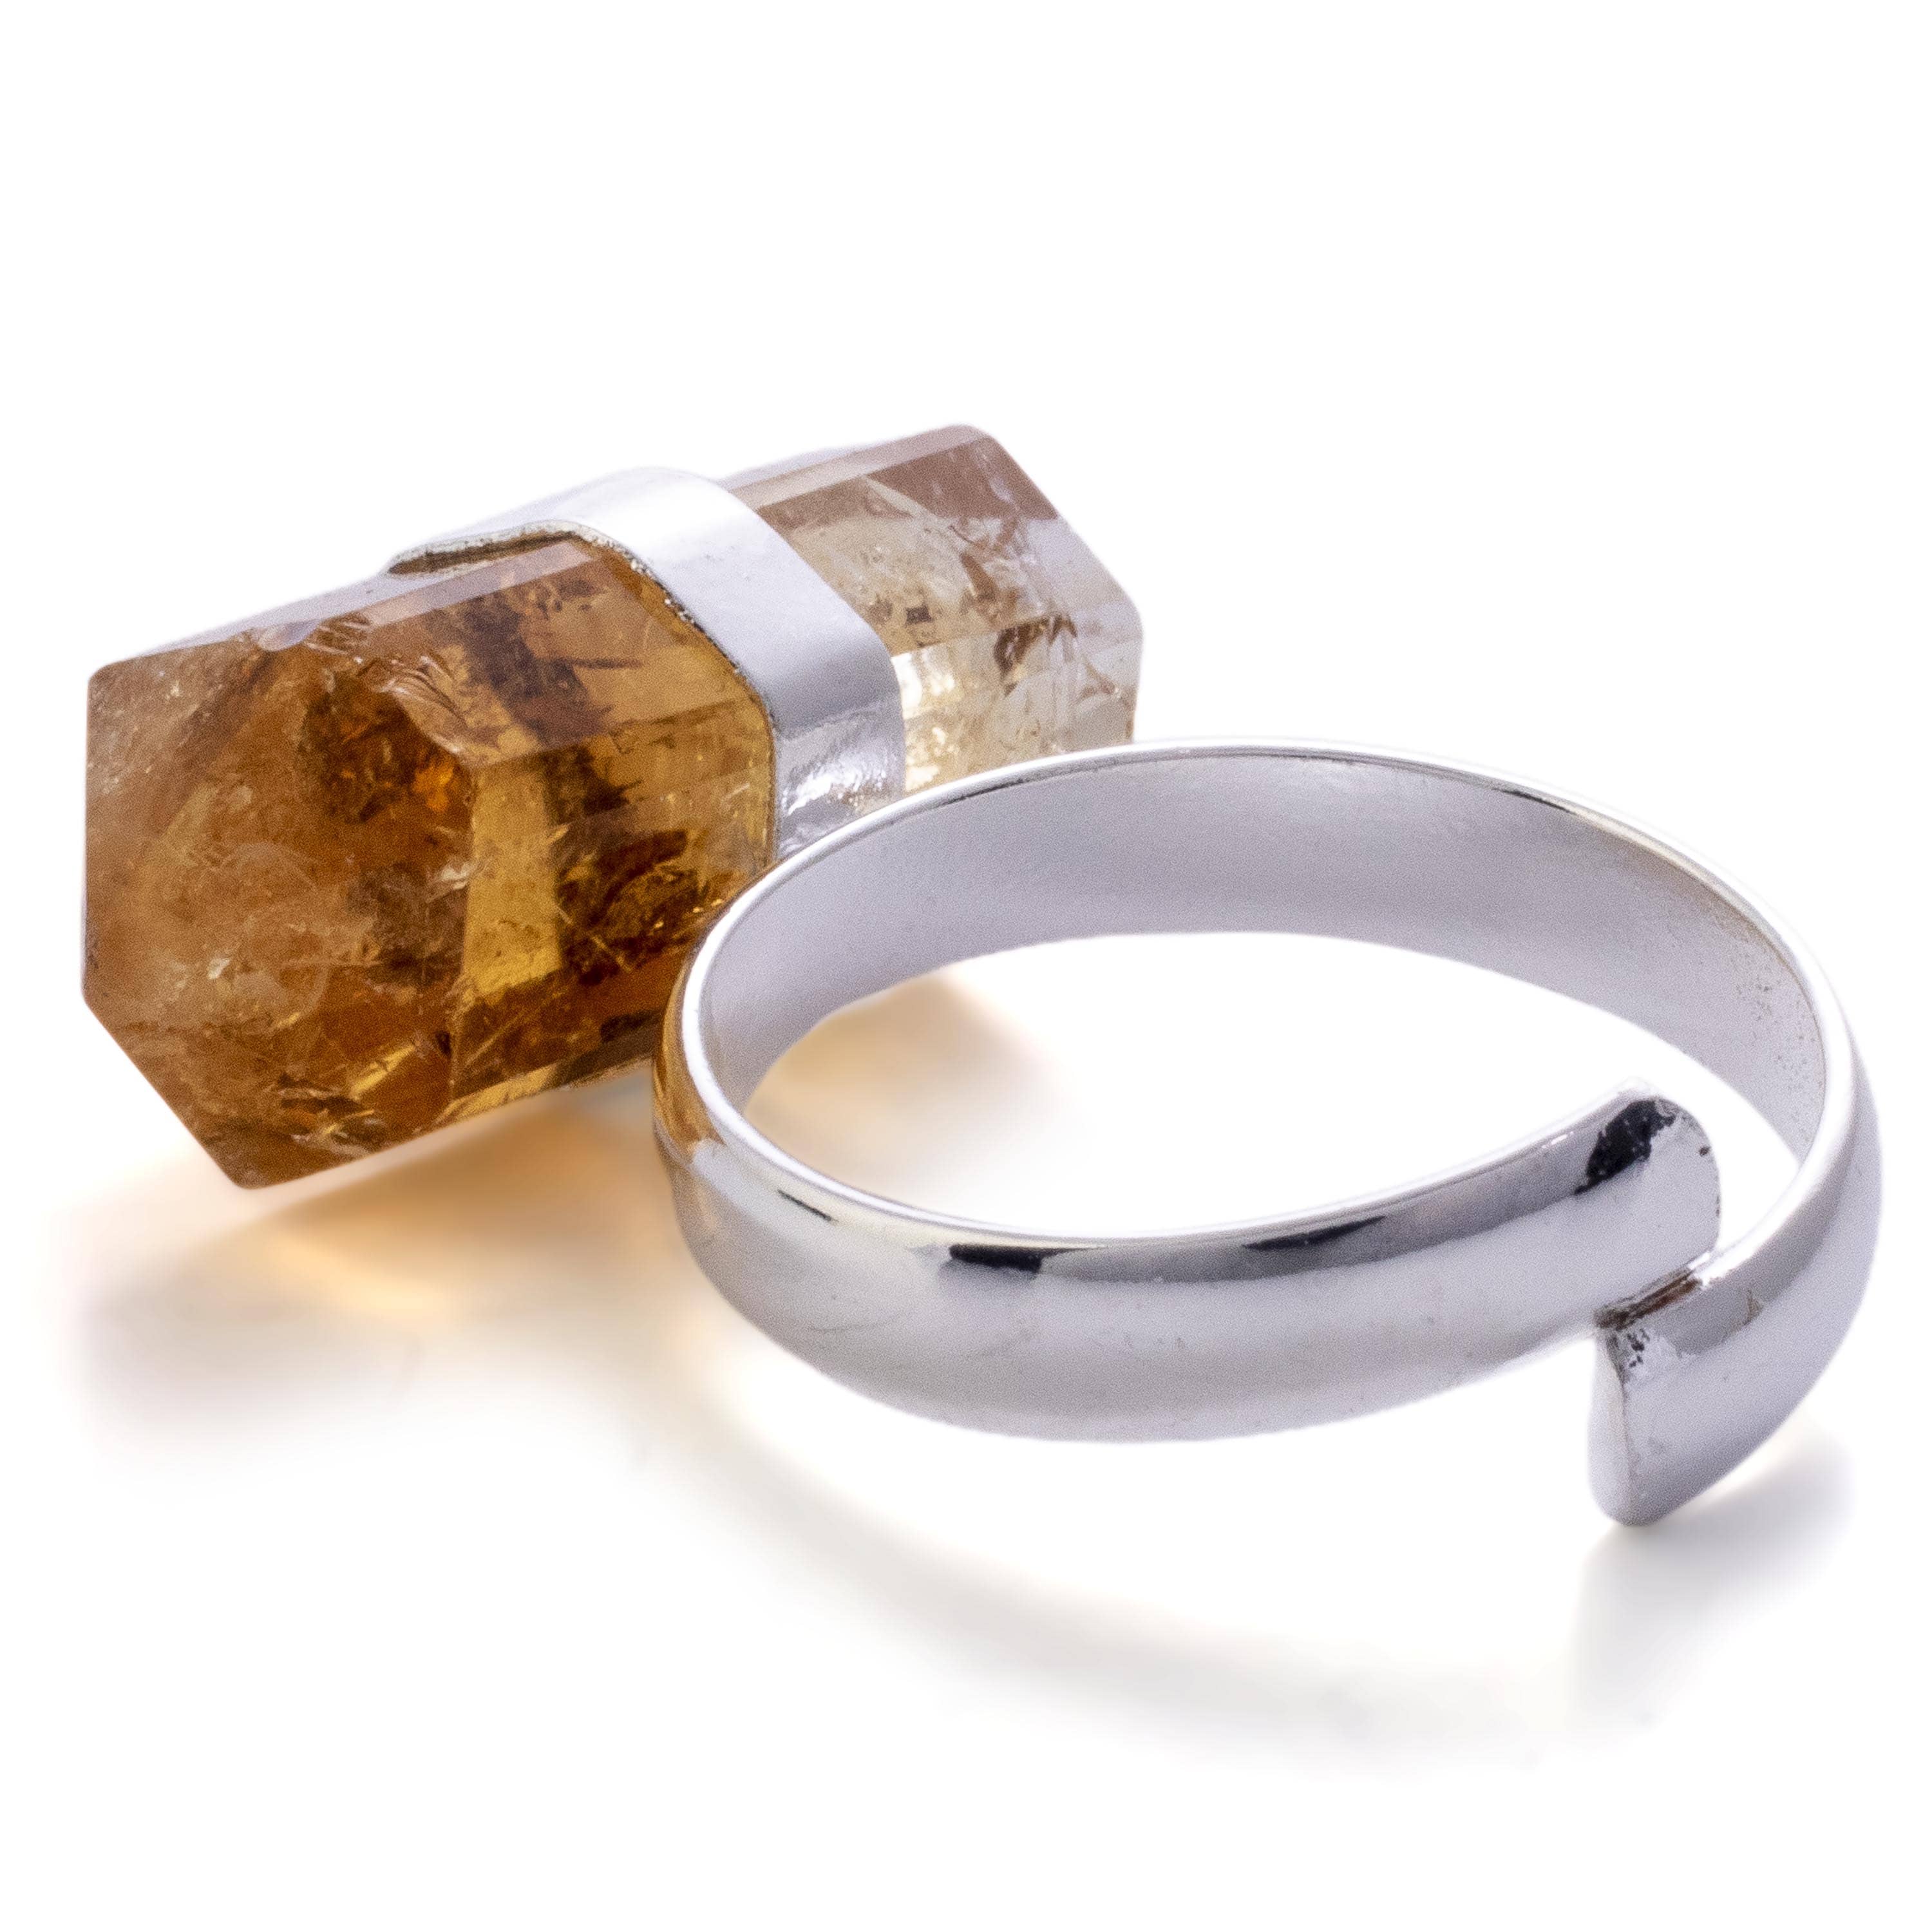 Kalifano Crystal Jewelry Silver Plated Citrine Adjustable Ring CJR-MJS-CT